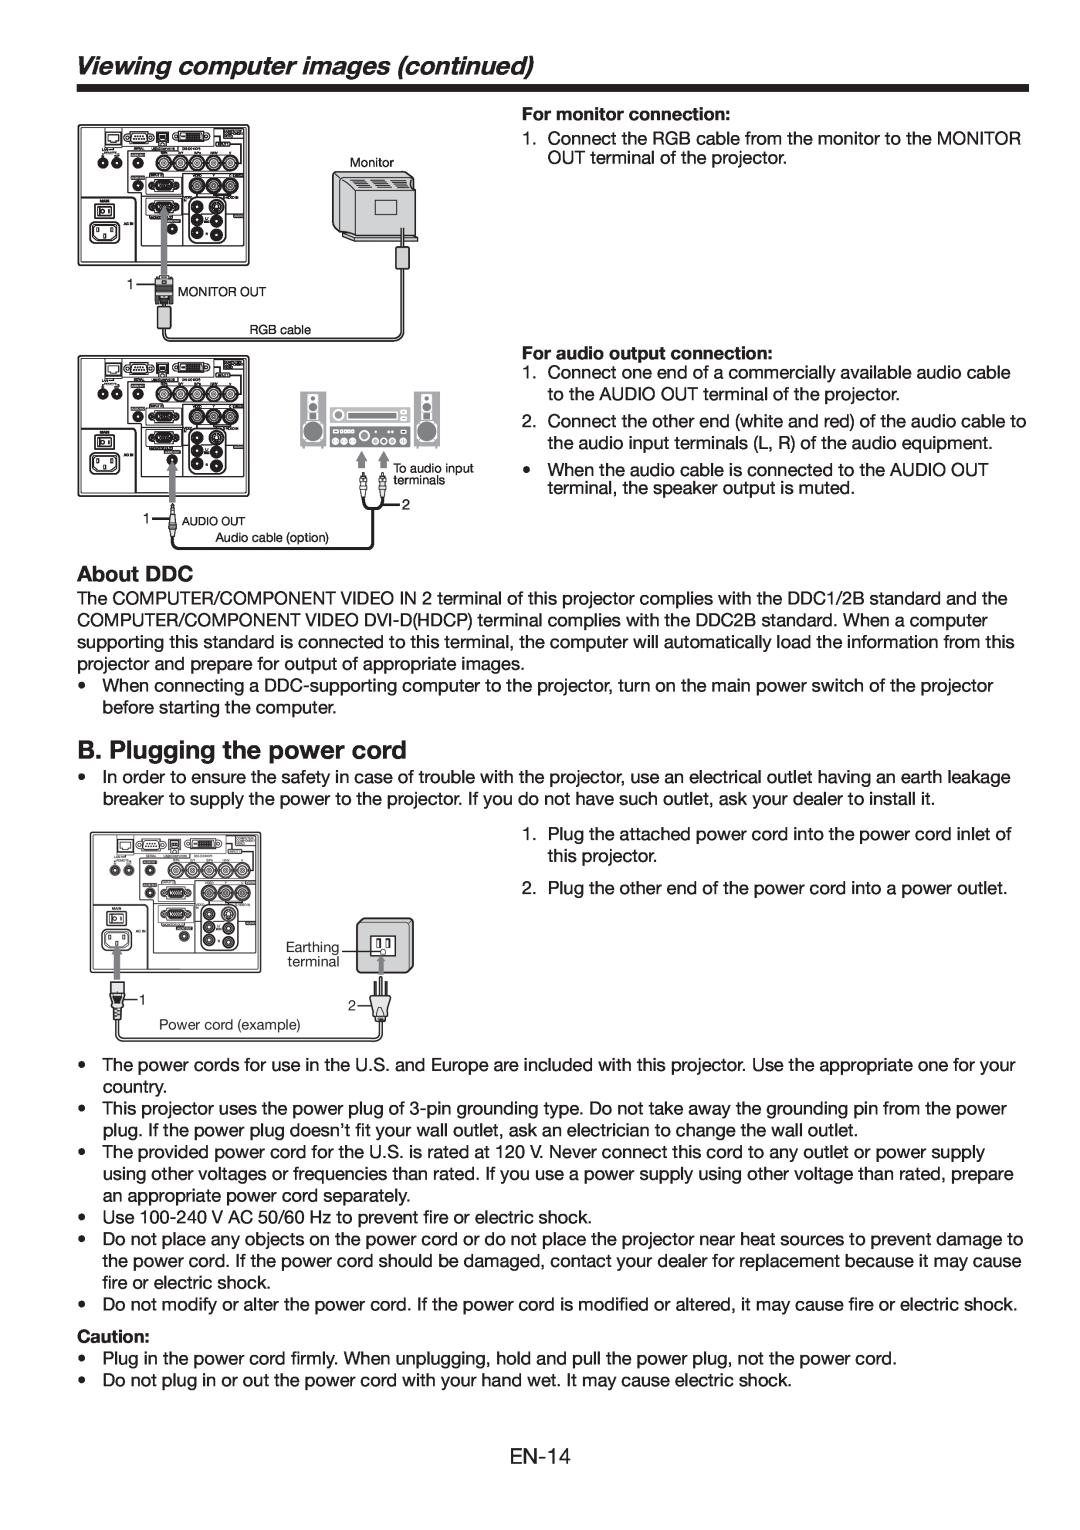 Mitsubishi Electronics FL6900U user manual Viewing computer images continued, B. Plugging the power cord, About DDC 